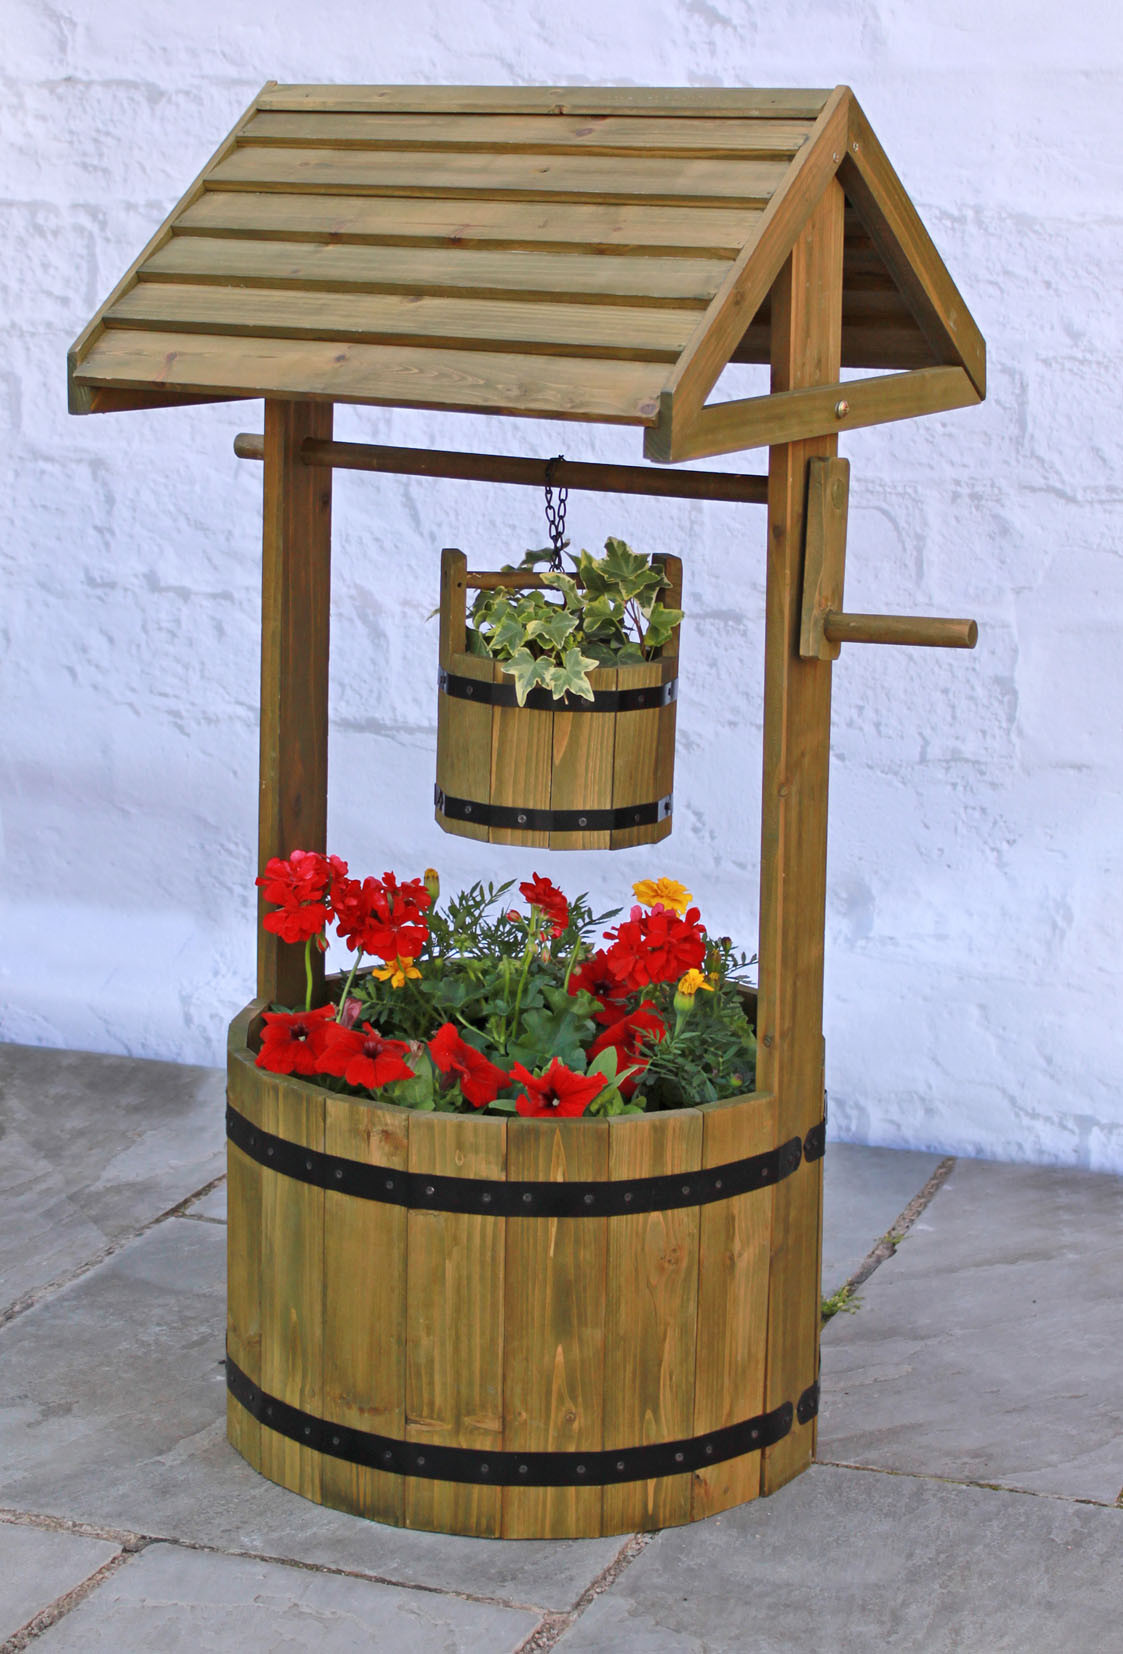 DIY Wishing Well Plans
 Wooden Decorative Wishing Well Planter H1m x D45cm £56 99